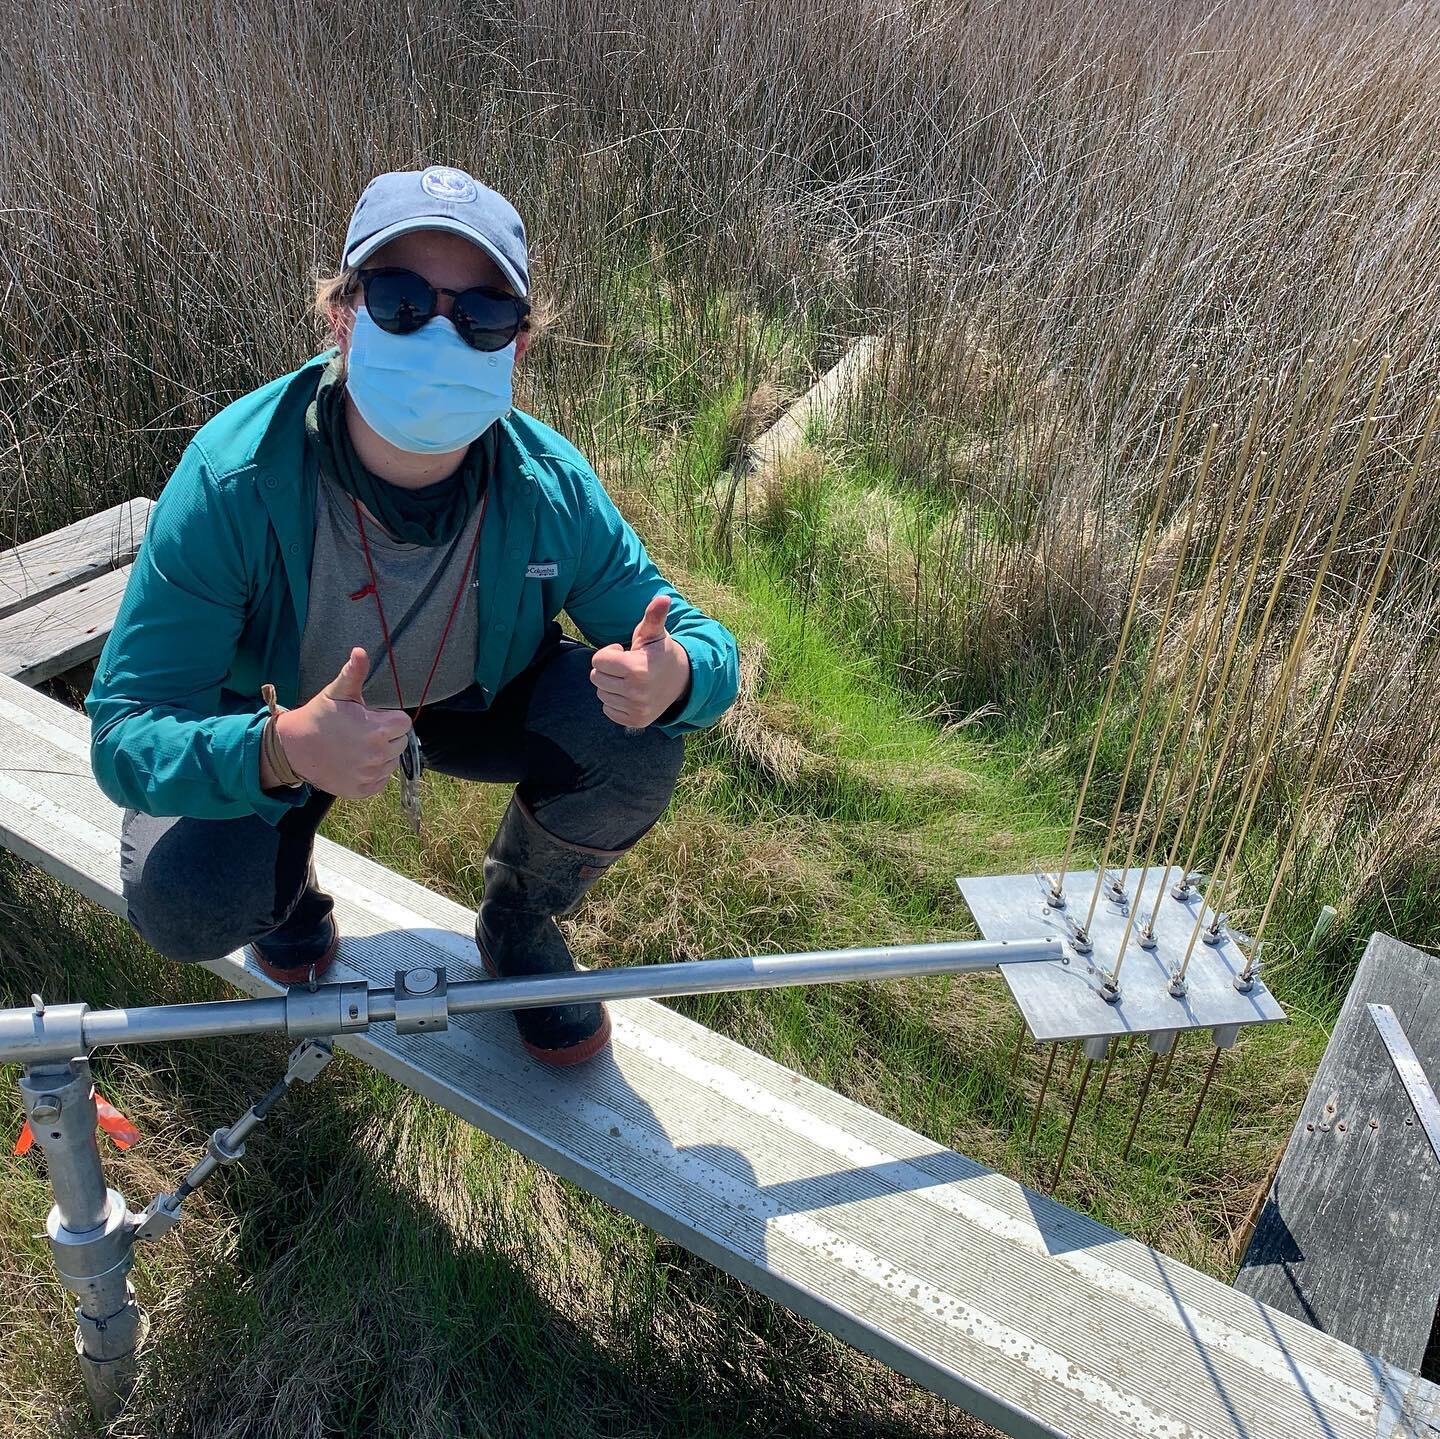 Great day to be in the marsh on the Eastern Shore #vcrlter Taking annual measurements of the marsh surface to track marsh accretion.